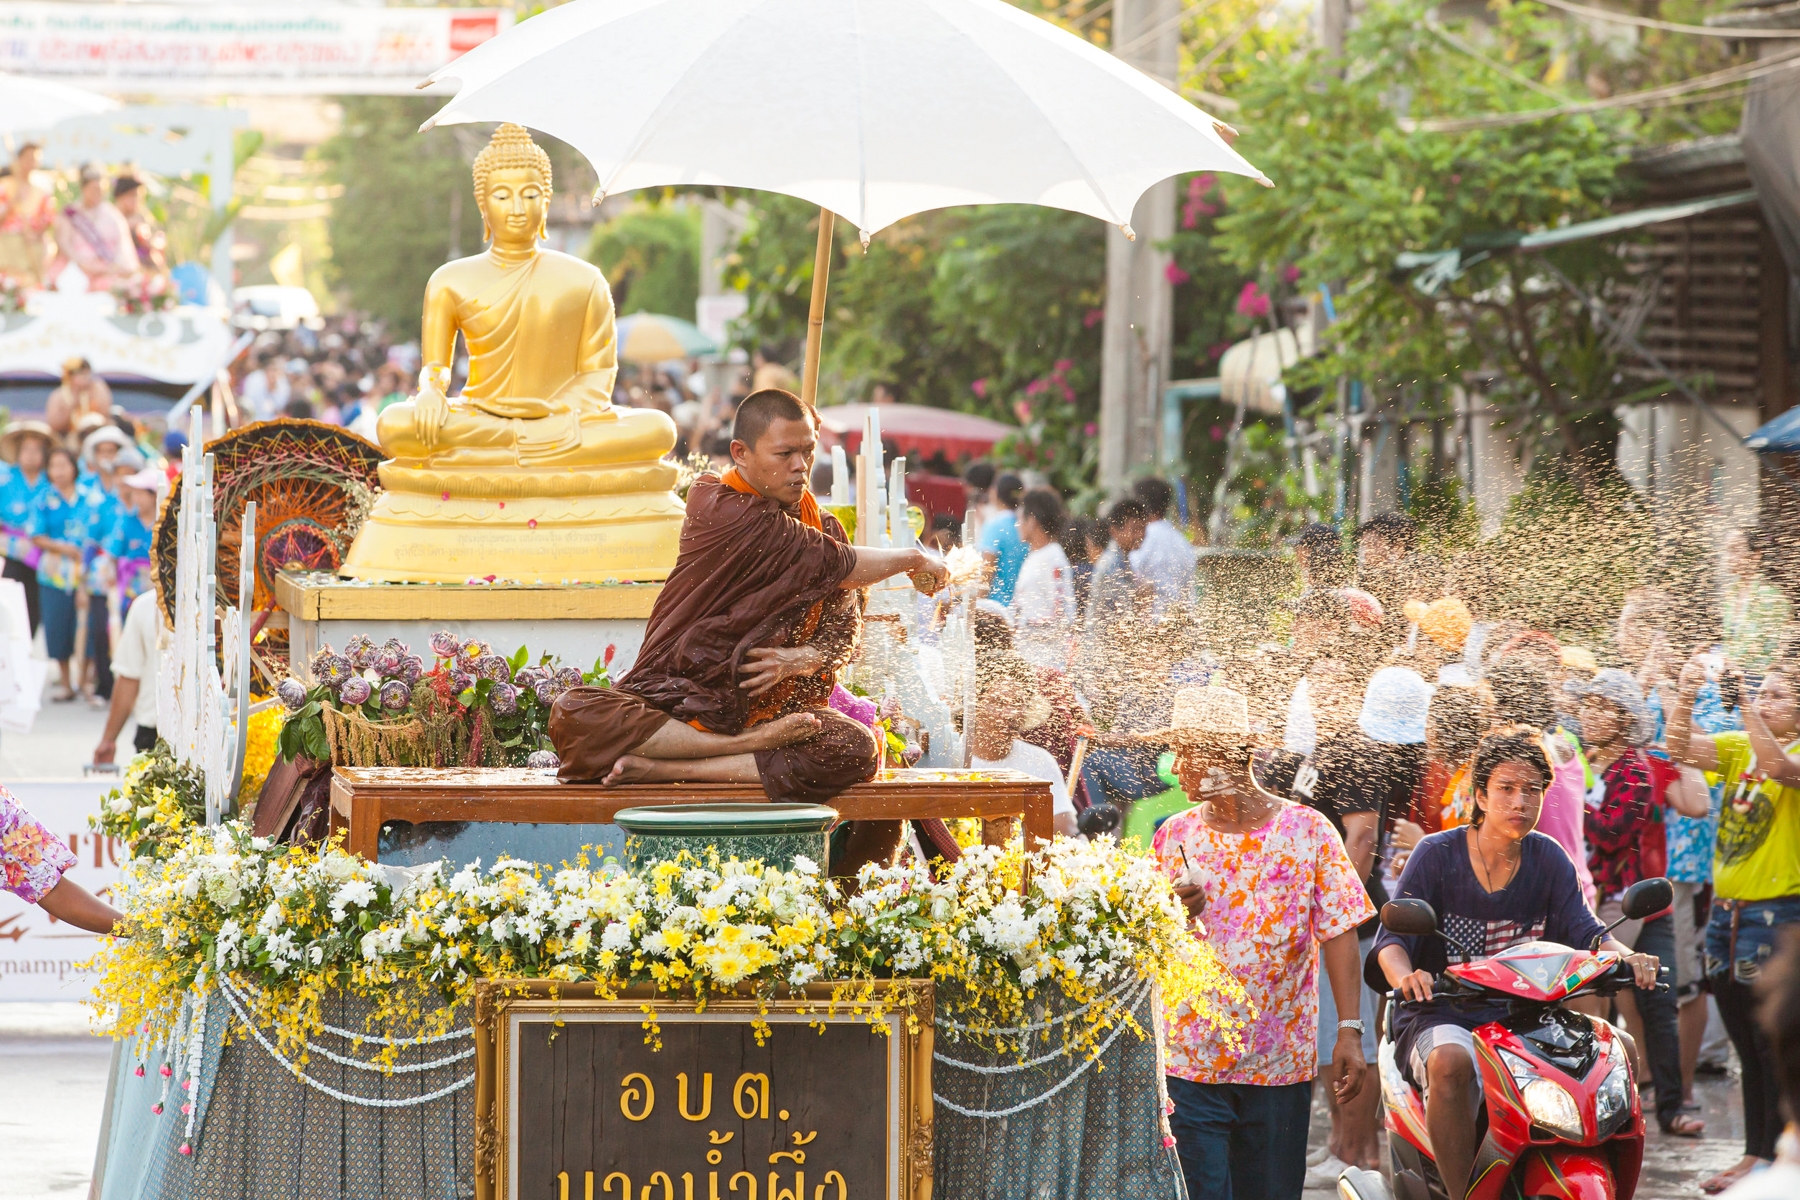 A Buddhist monk sprinkles fragrant water during Songkran